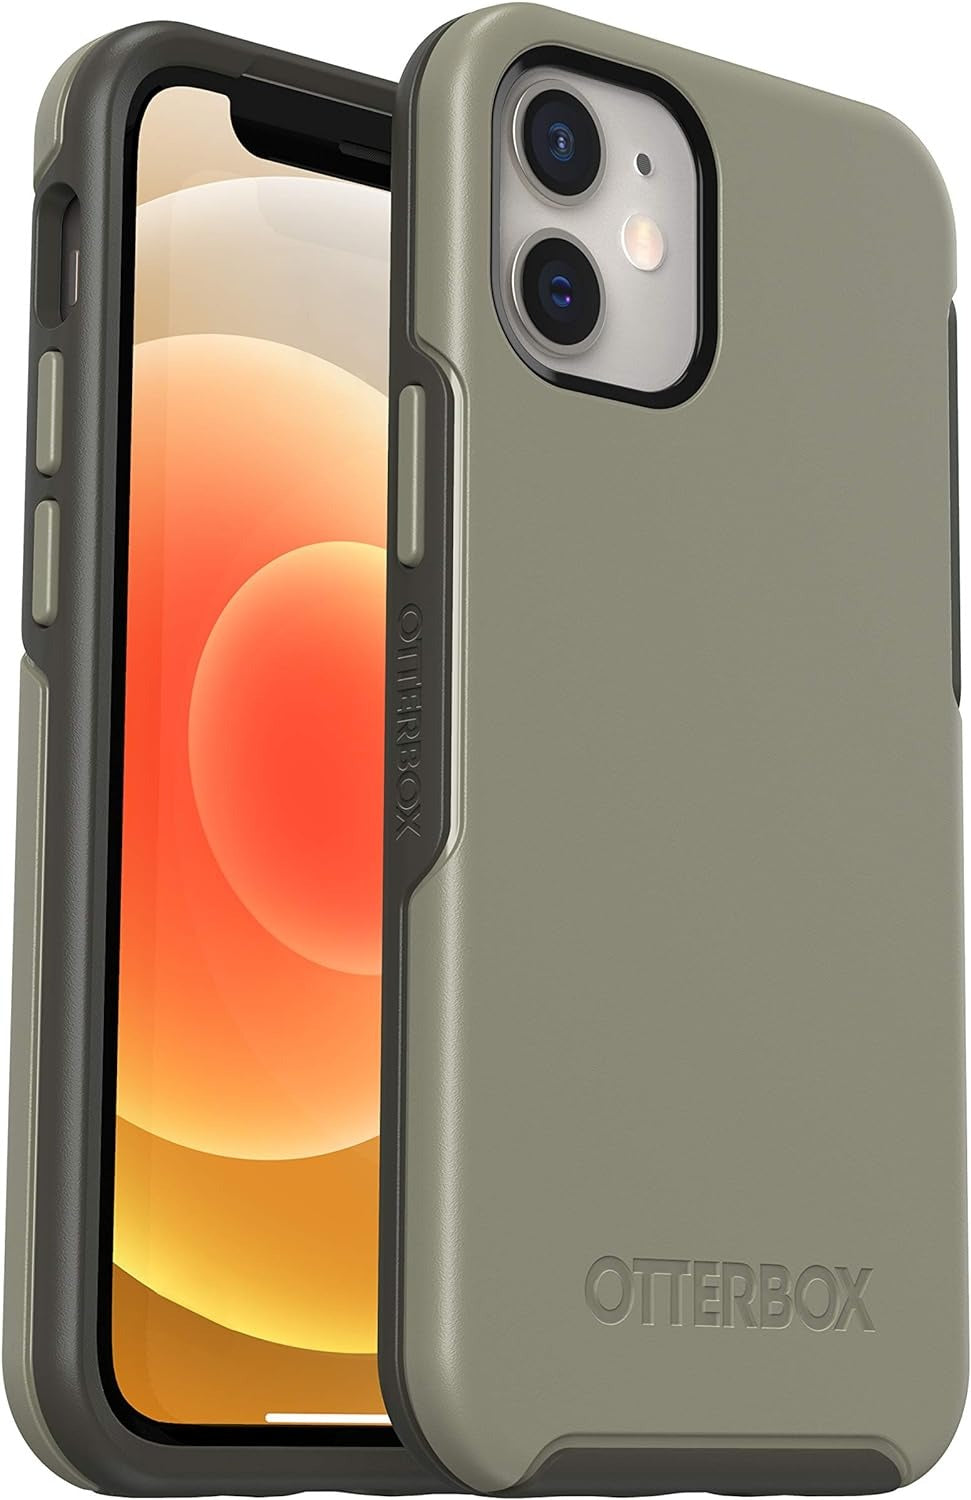 OtterBox SYMMETRY SERIES Case for Apple iPhone 12 Mini - Earl Grey (New)